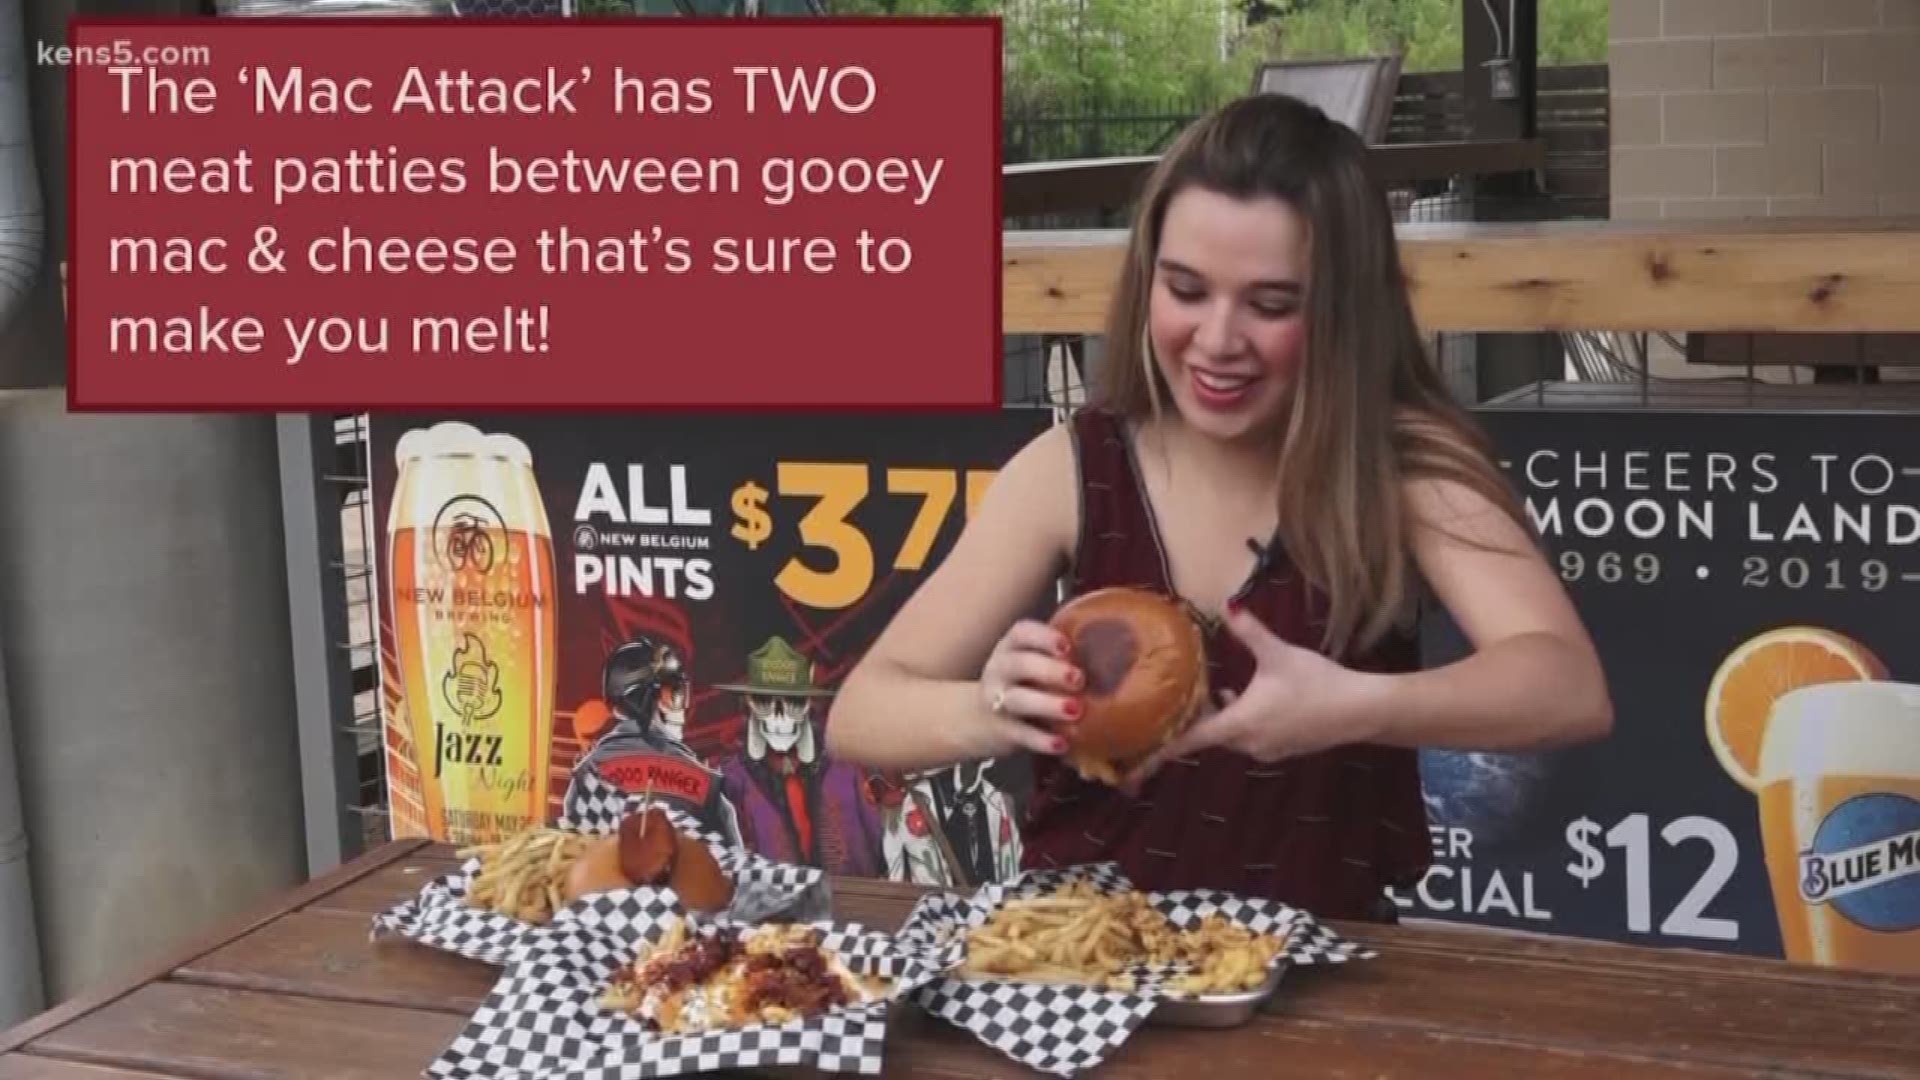 Calling all food fanatics! Digital Journalist Lexi Hazlett shares more about a local food truck that specializes in burgers and fries, but on a new level...